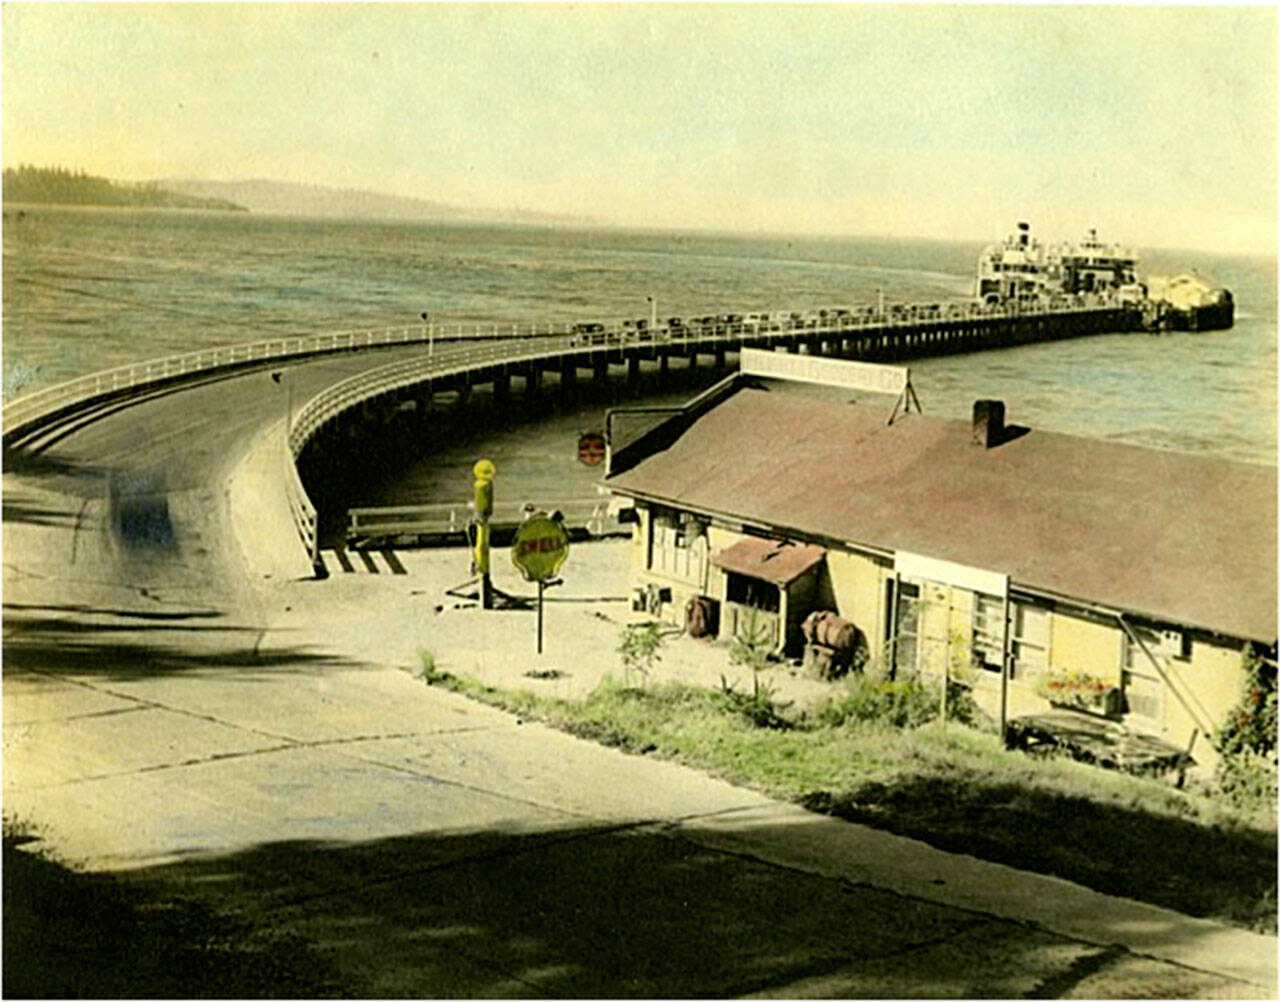 Photo Courtesy Vashon Heritage Museum
The Heights Grocery Co, located just next to the North End Ferry Dock, was captured here in a photograph taken around 1930. The store is now the site of the Wild Mermaid Market.